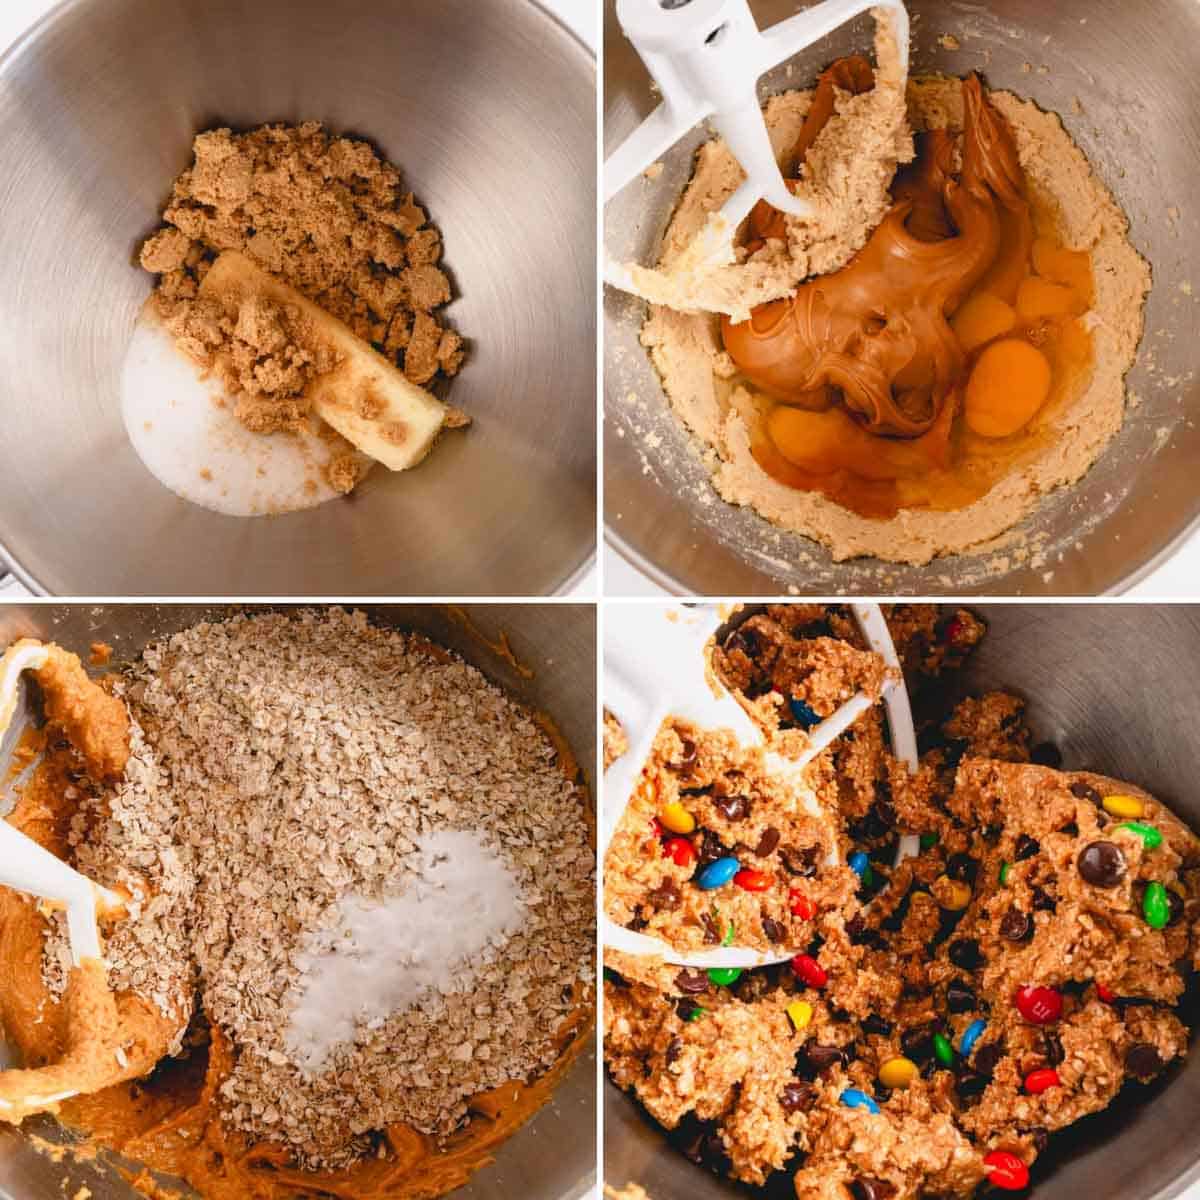 Four images showing the process of combining ingredients to make monster cookie bar dough.